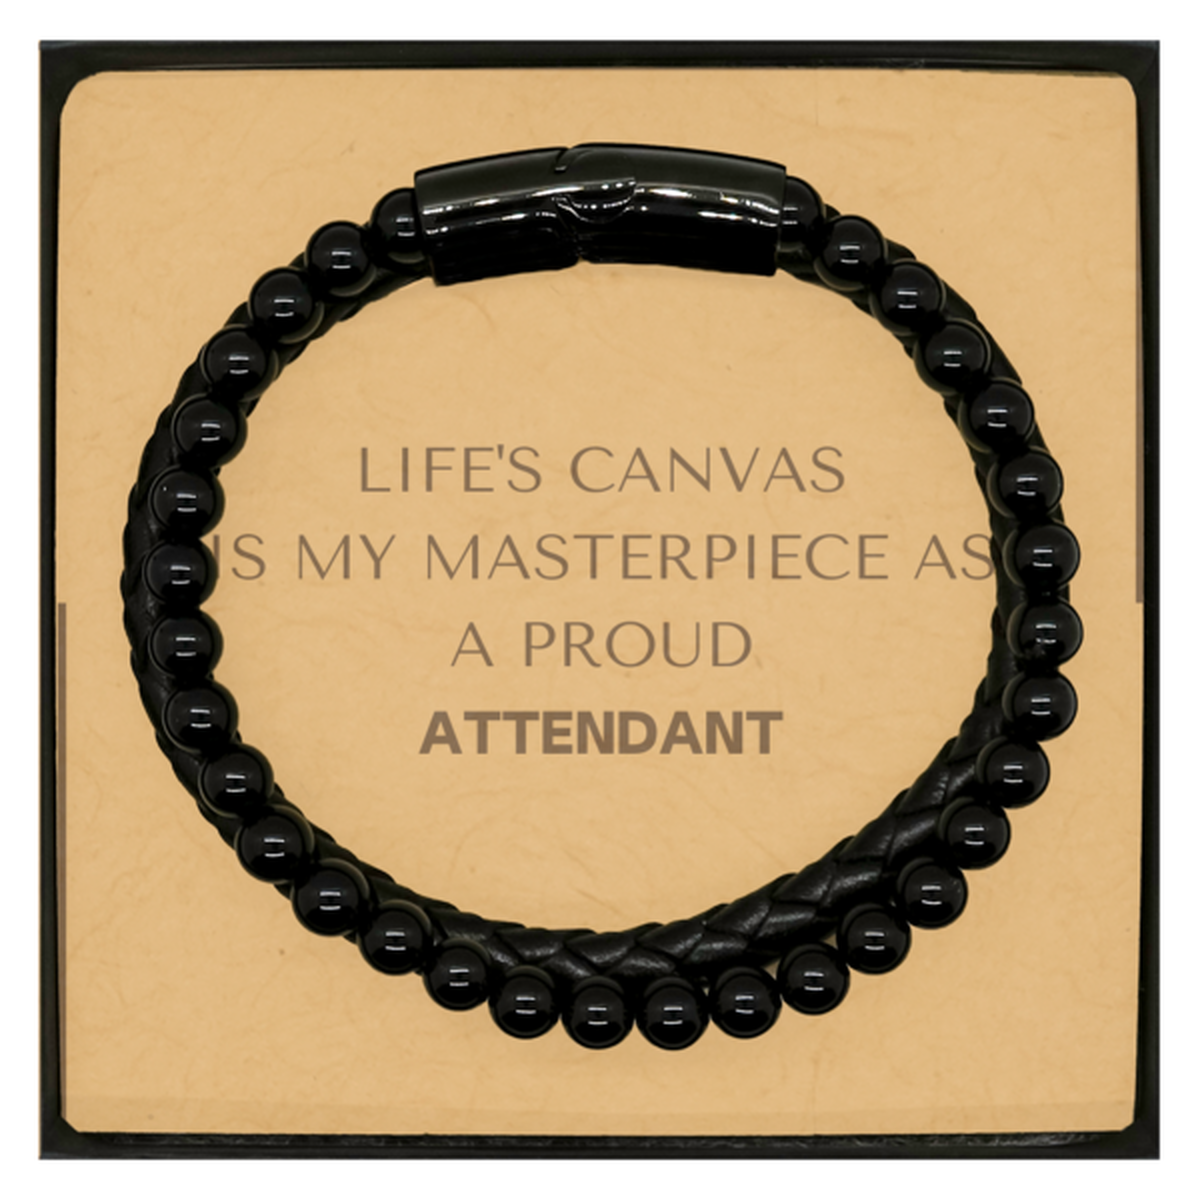 Proud Attendant Gifts, Life's canvas is my masterpiece, Epic Birthday Christmas Unique Stone Leather Bracelets For Attendant, Coworkers, Men, Women, Friends